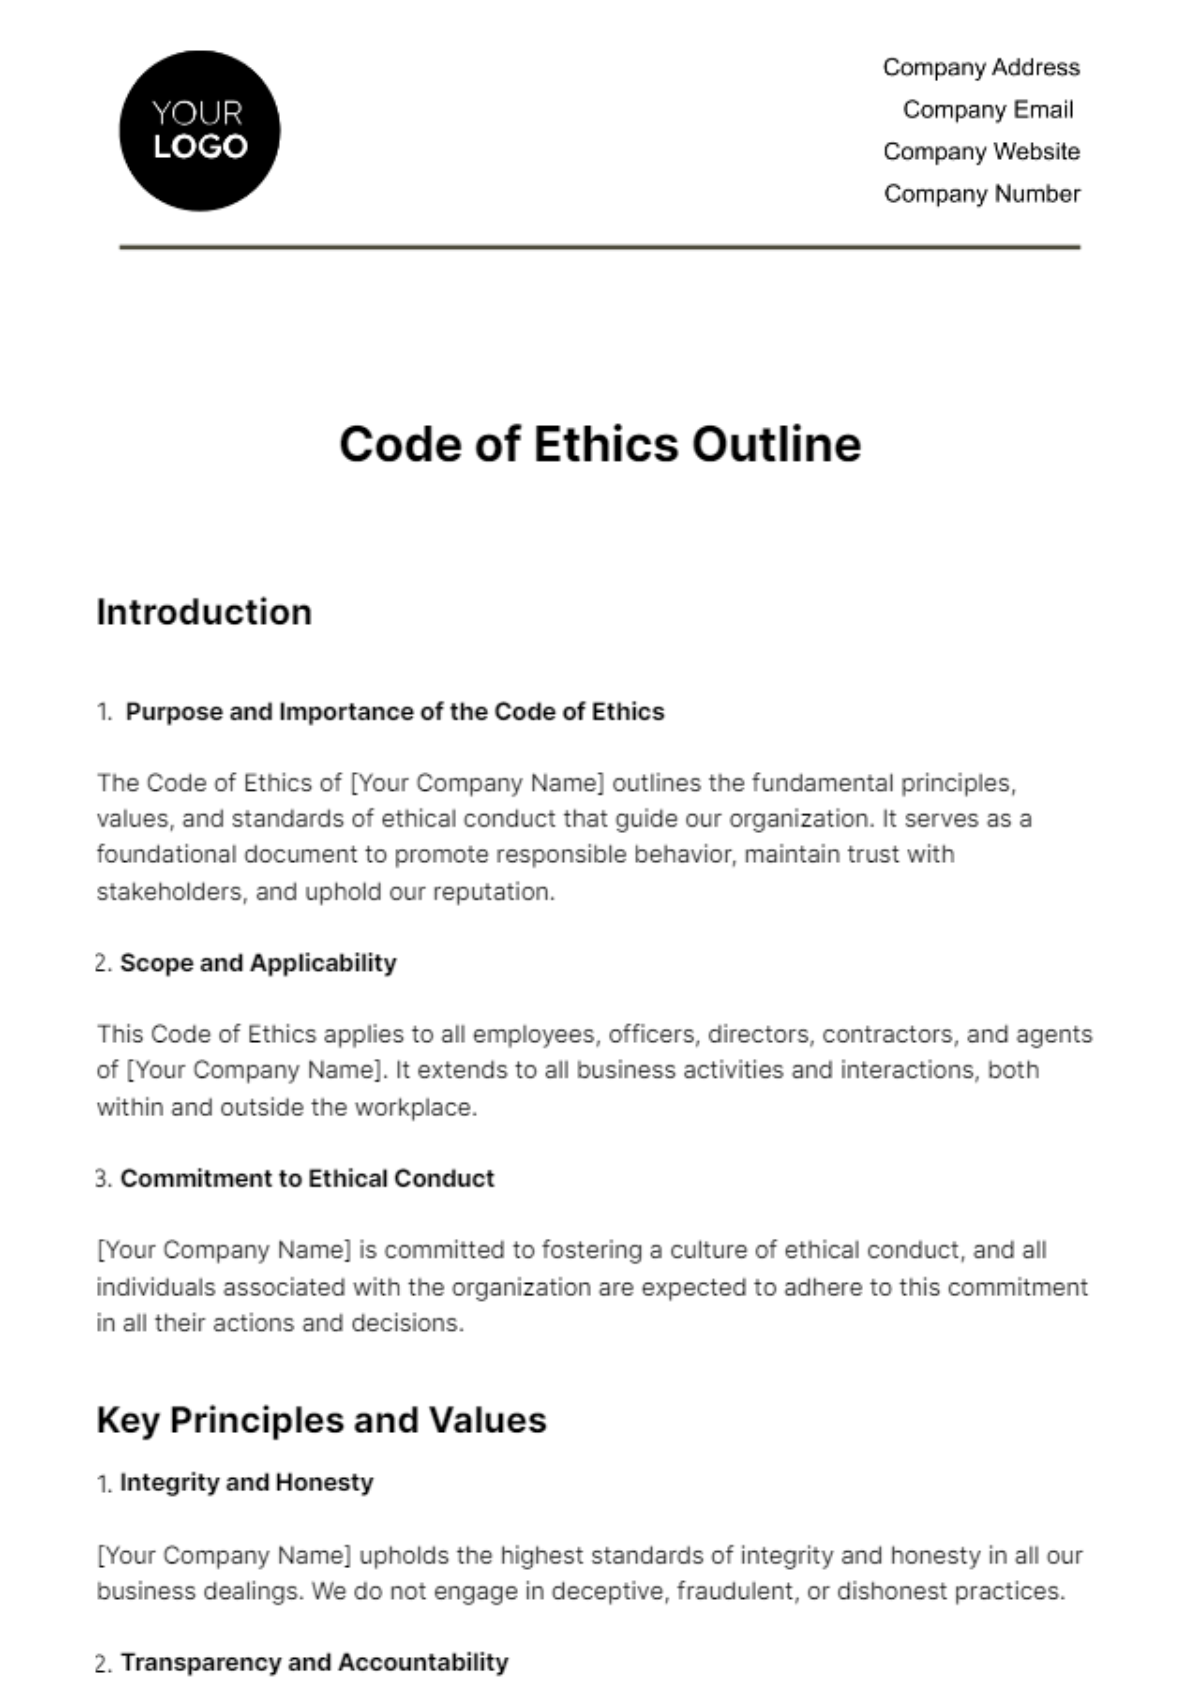 Free Code of Ethics Outline HR Template